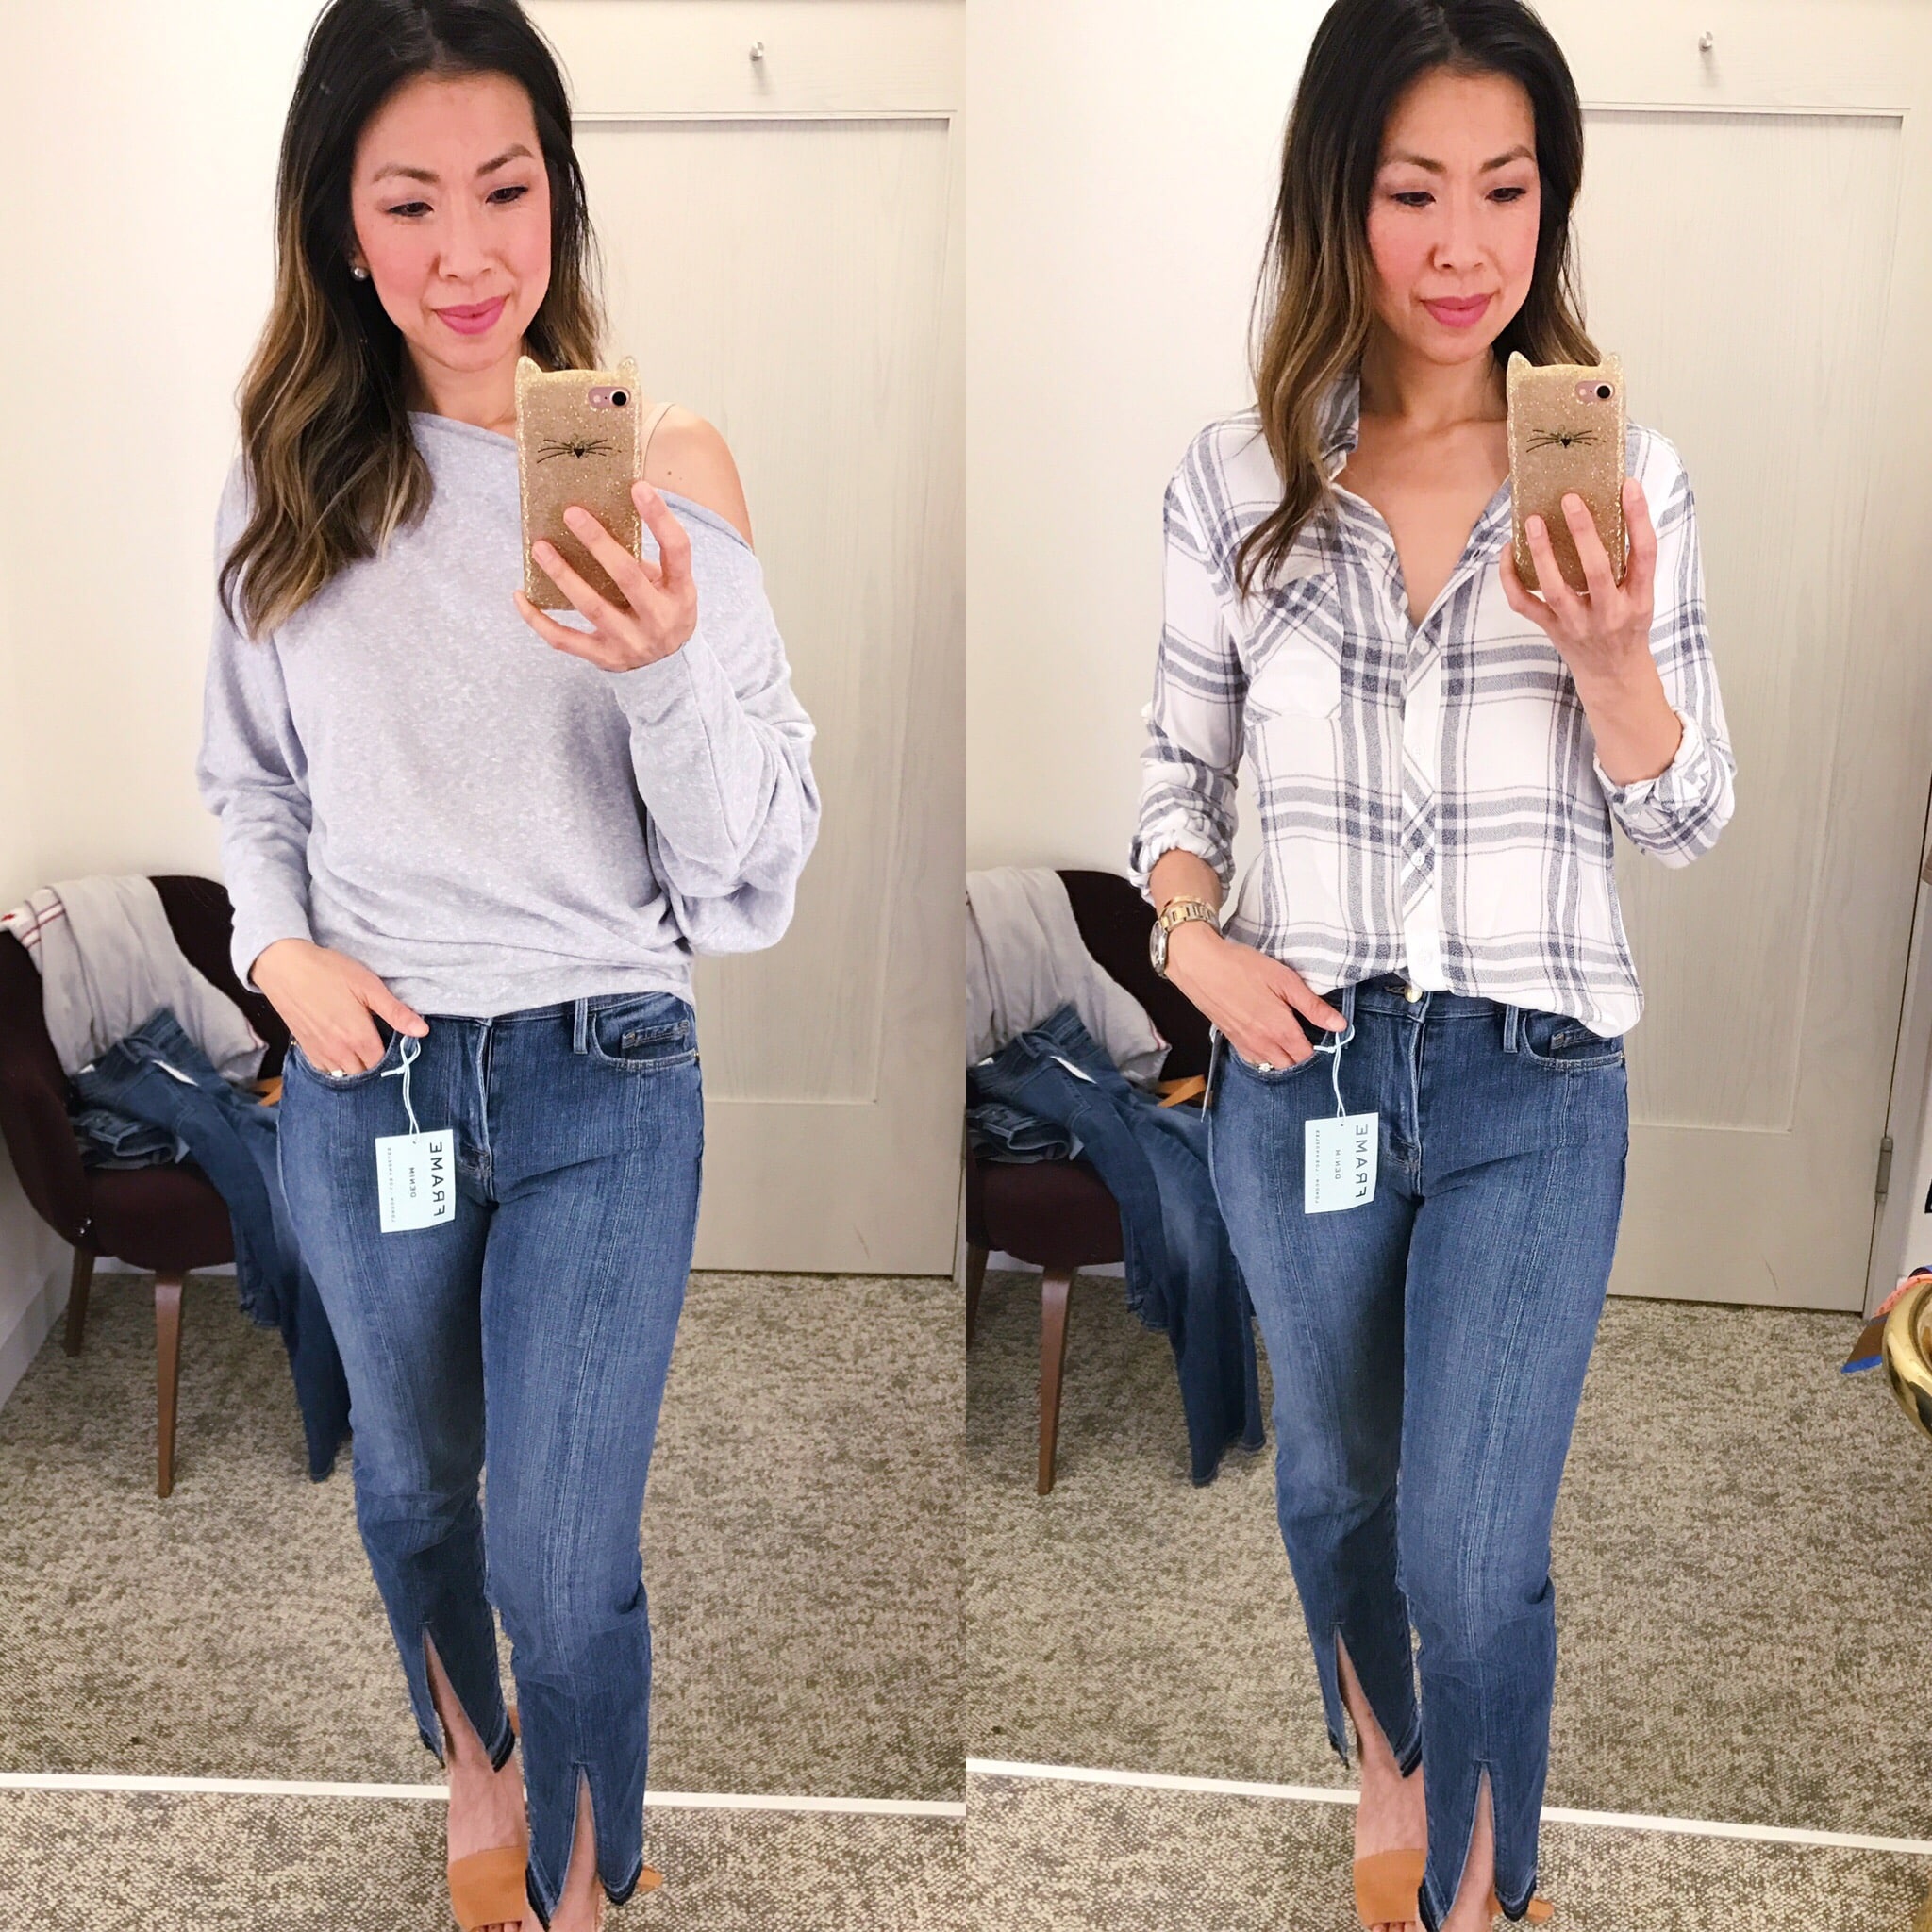 Nordstrom Anniversary Sale Dressing Room Diaries 2017 free people off the shoulder top rails hunter plaid button down shirt